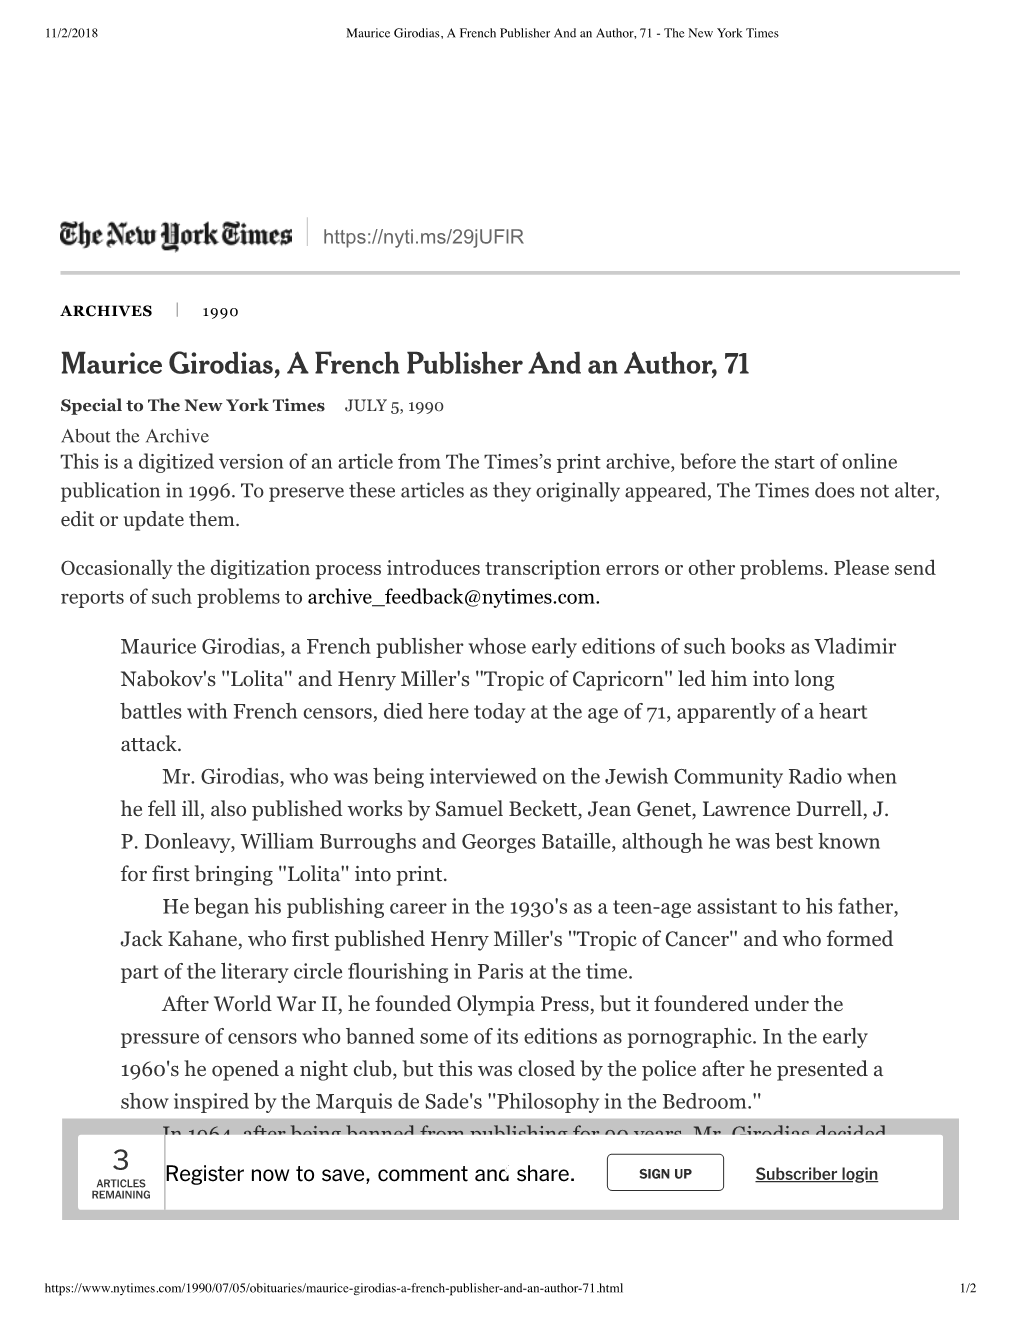 Maurice Girodias, a French Publisher and an Author, 71 - the New York Times